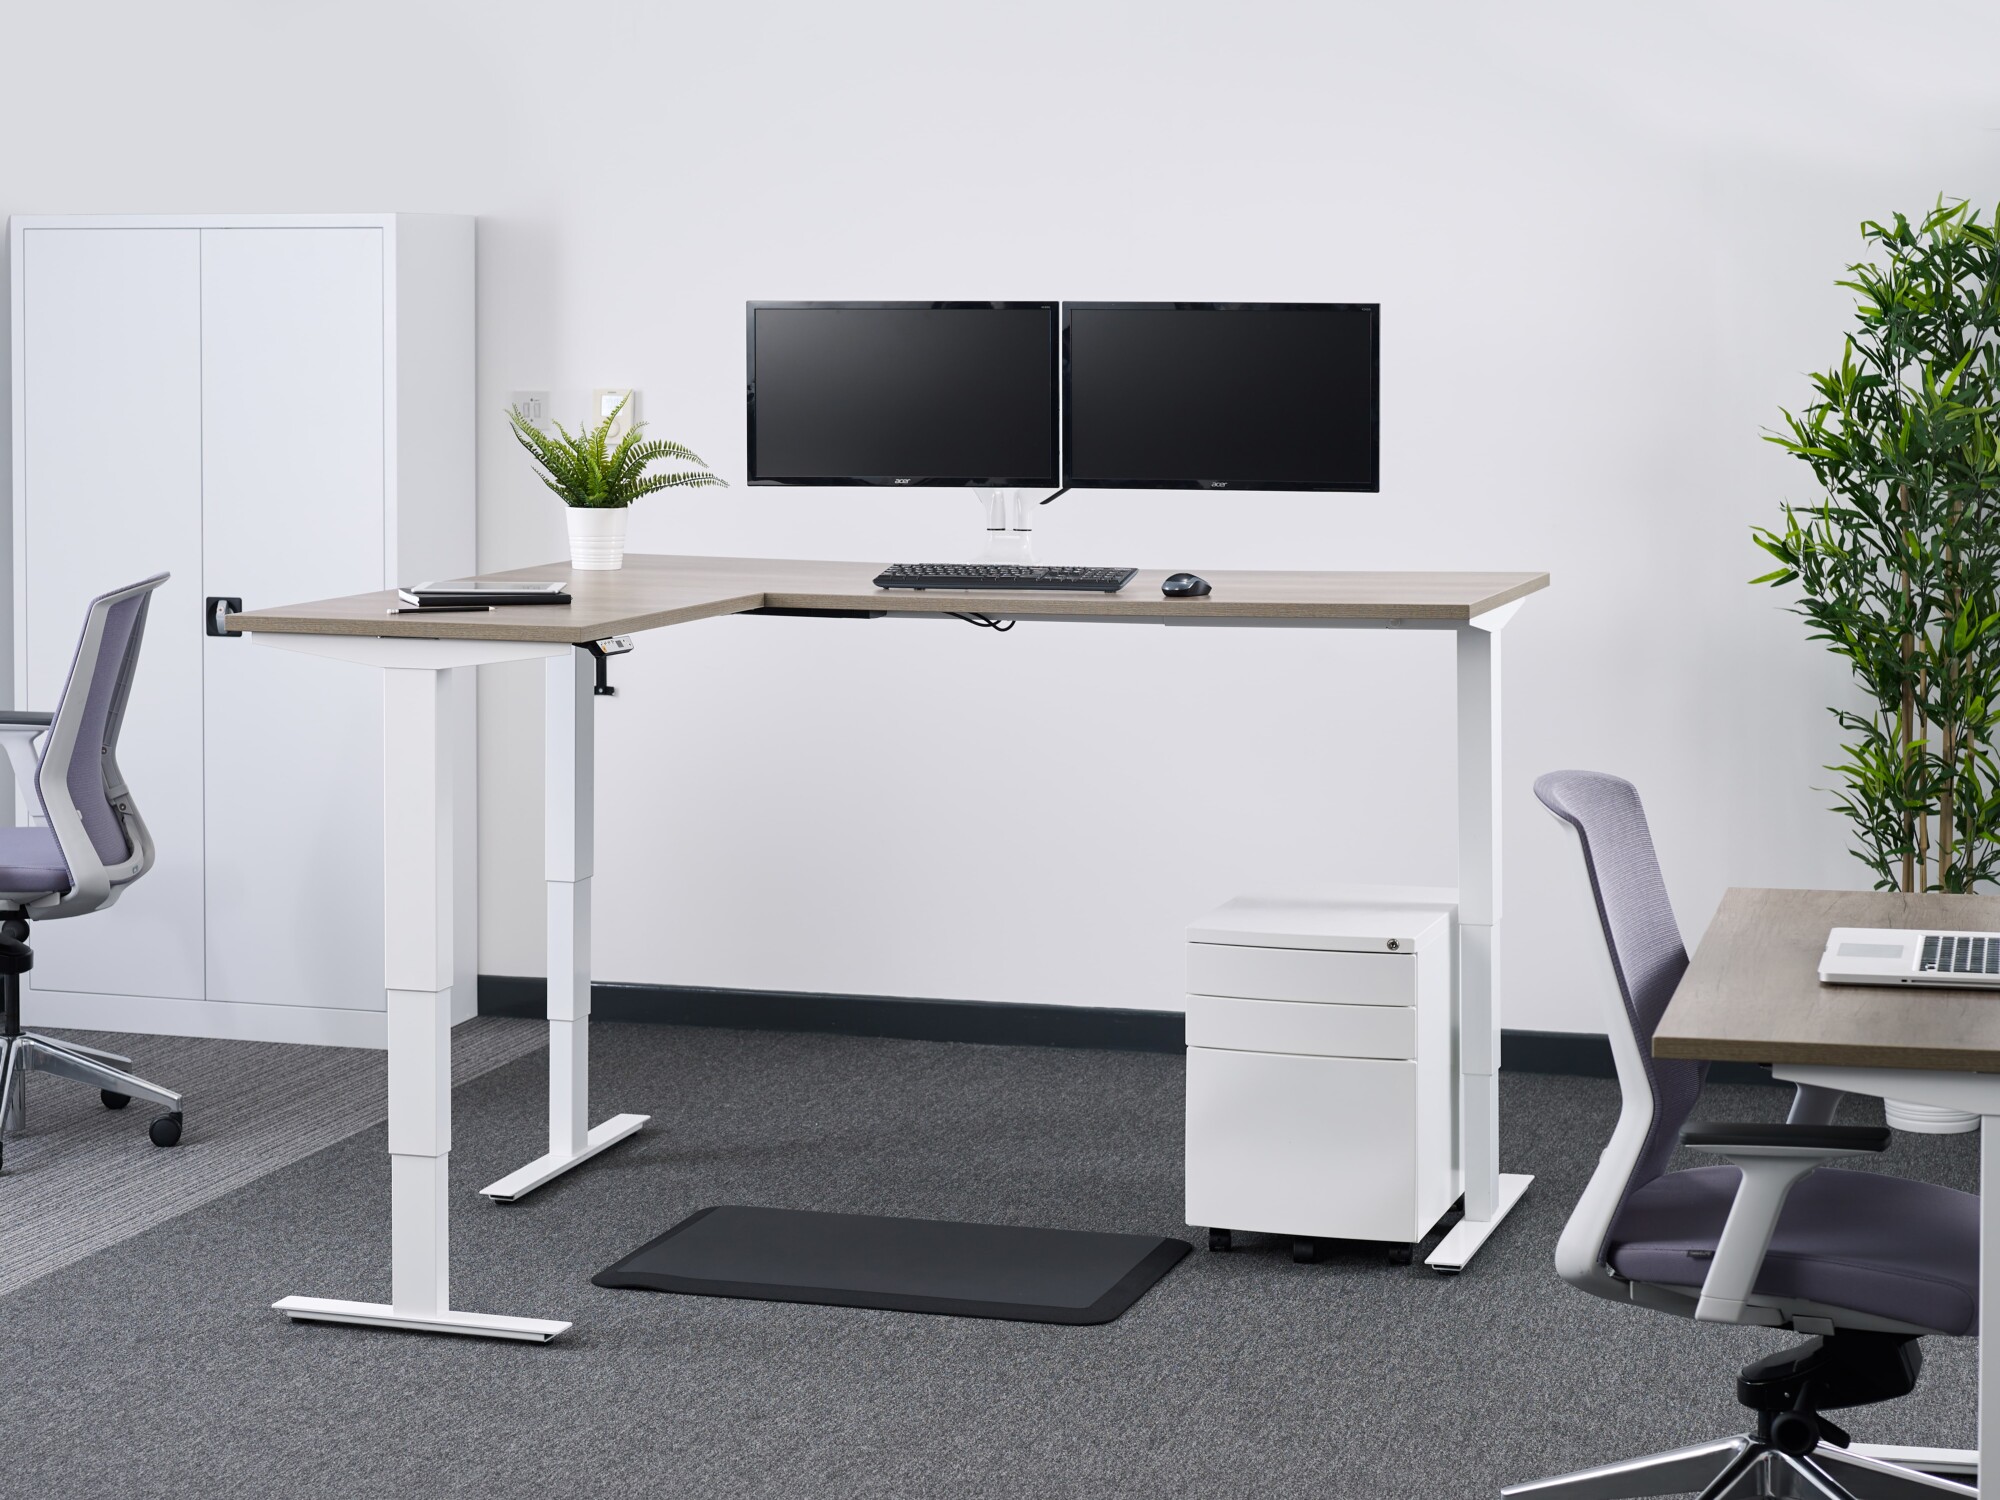 The three-staged ergonomic electric height adjustable function caters for everyone, resulting in the largest variation from 625mm to 1285 mm.